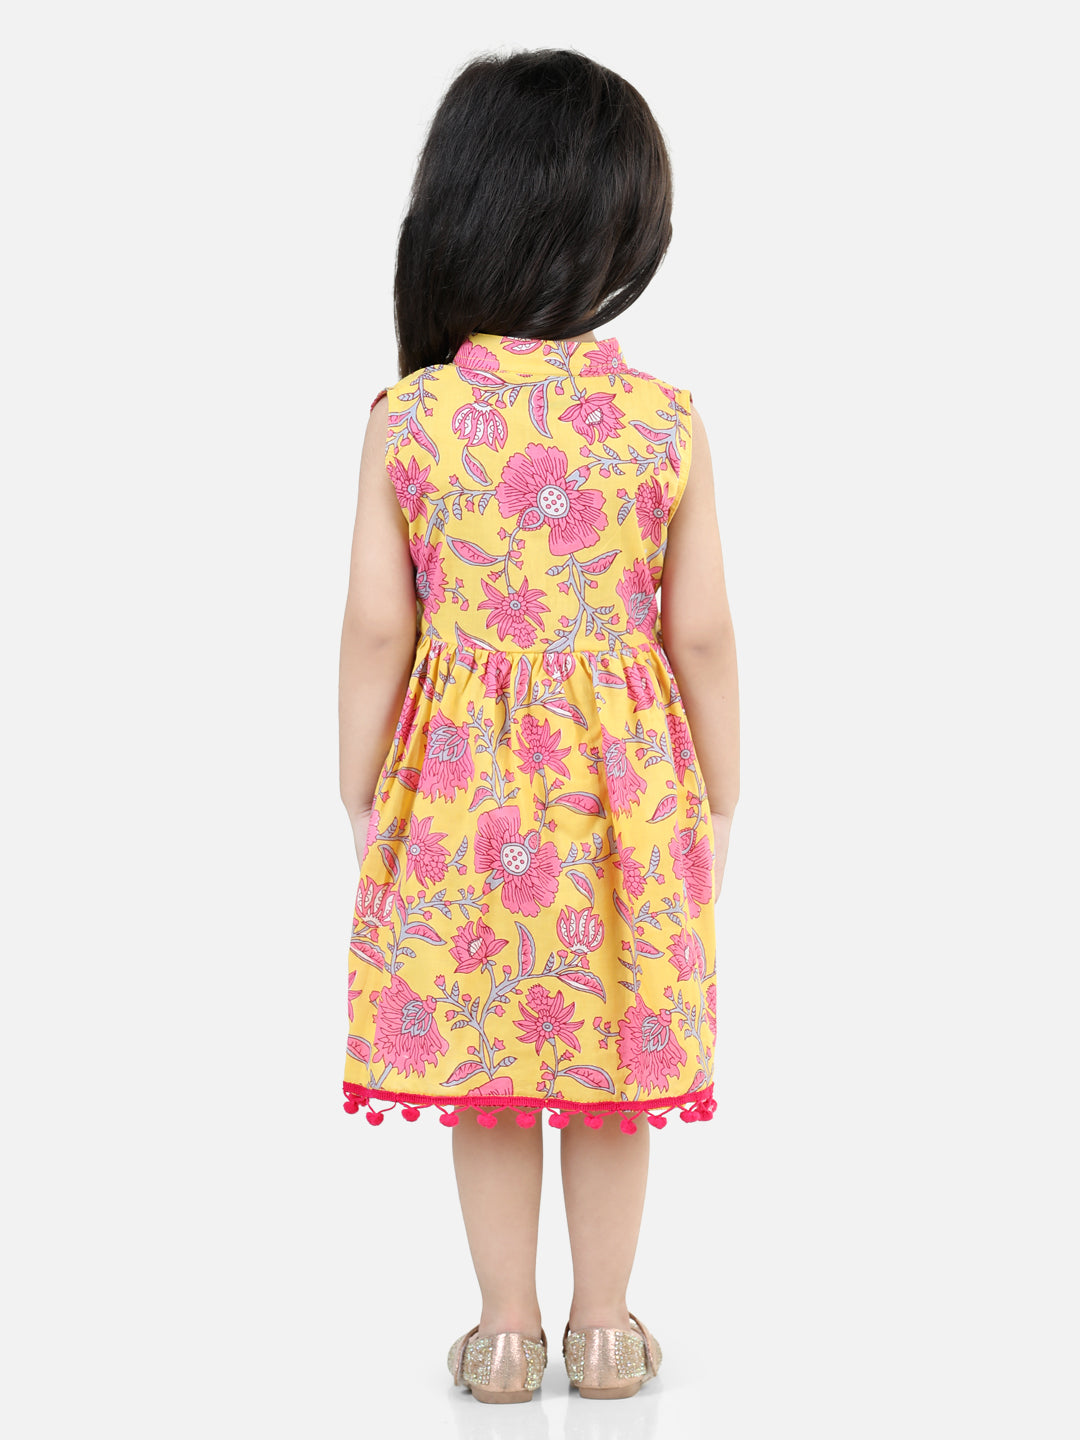 BownBee Pure Cotton Printed Frock  and Dresses for Girls- Yellow